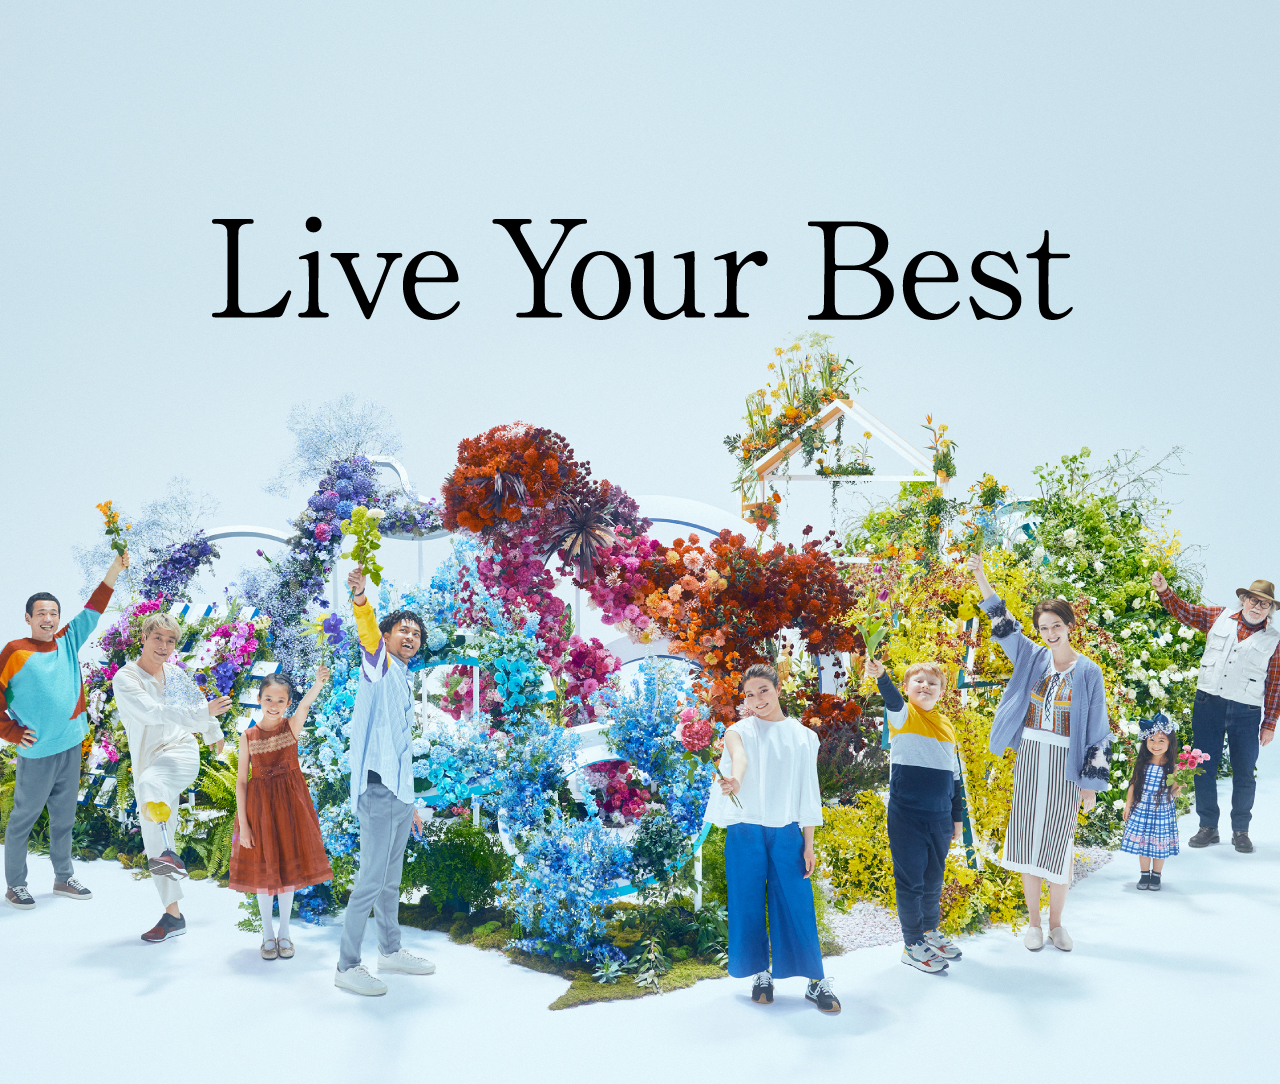 Live Your Best